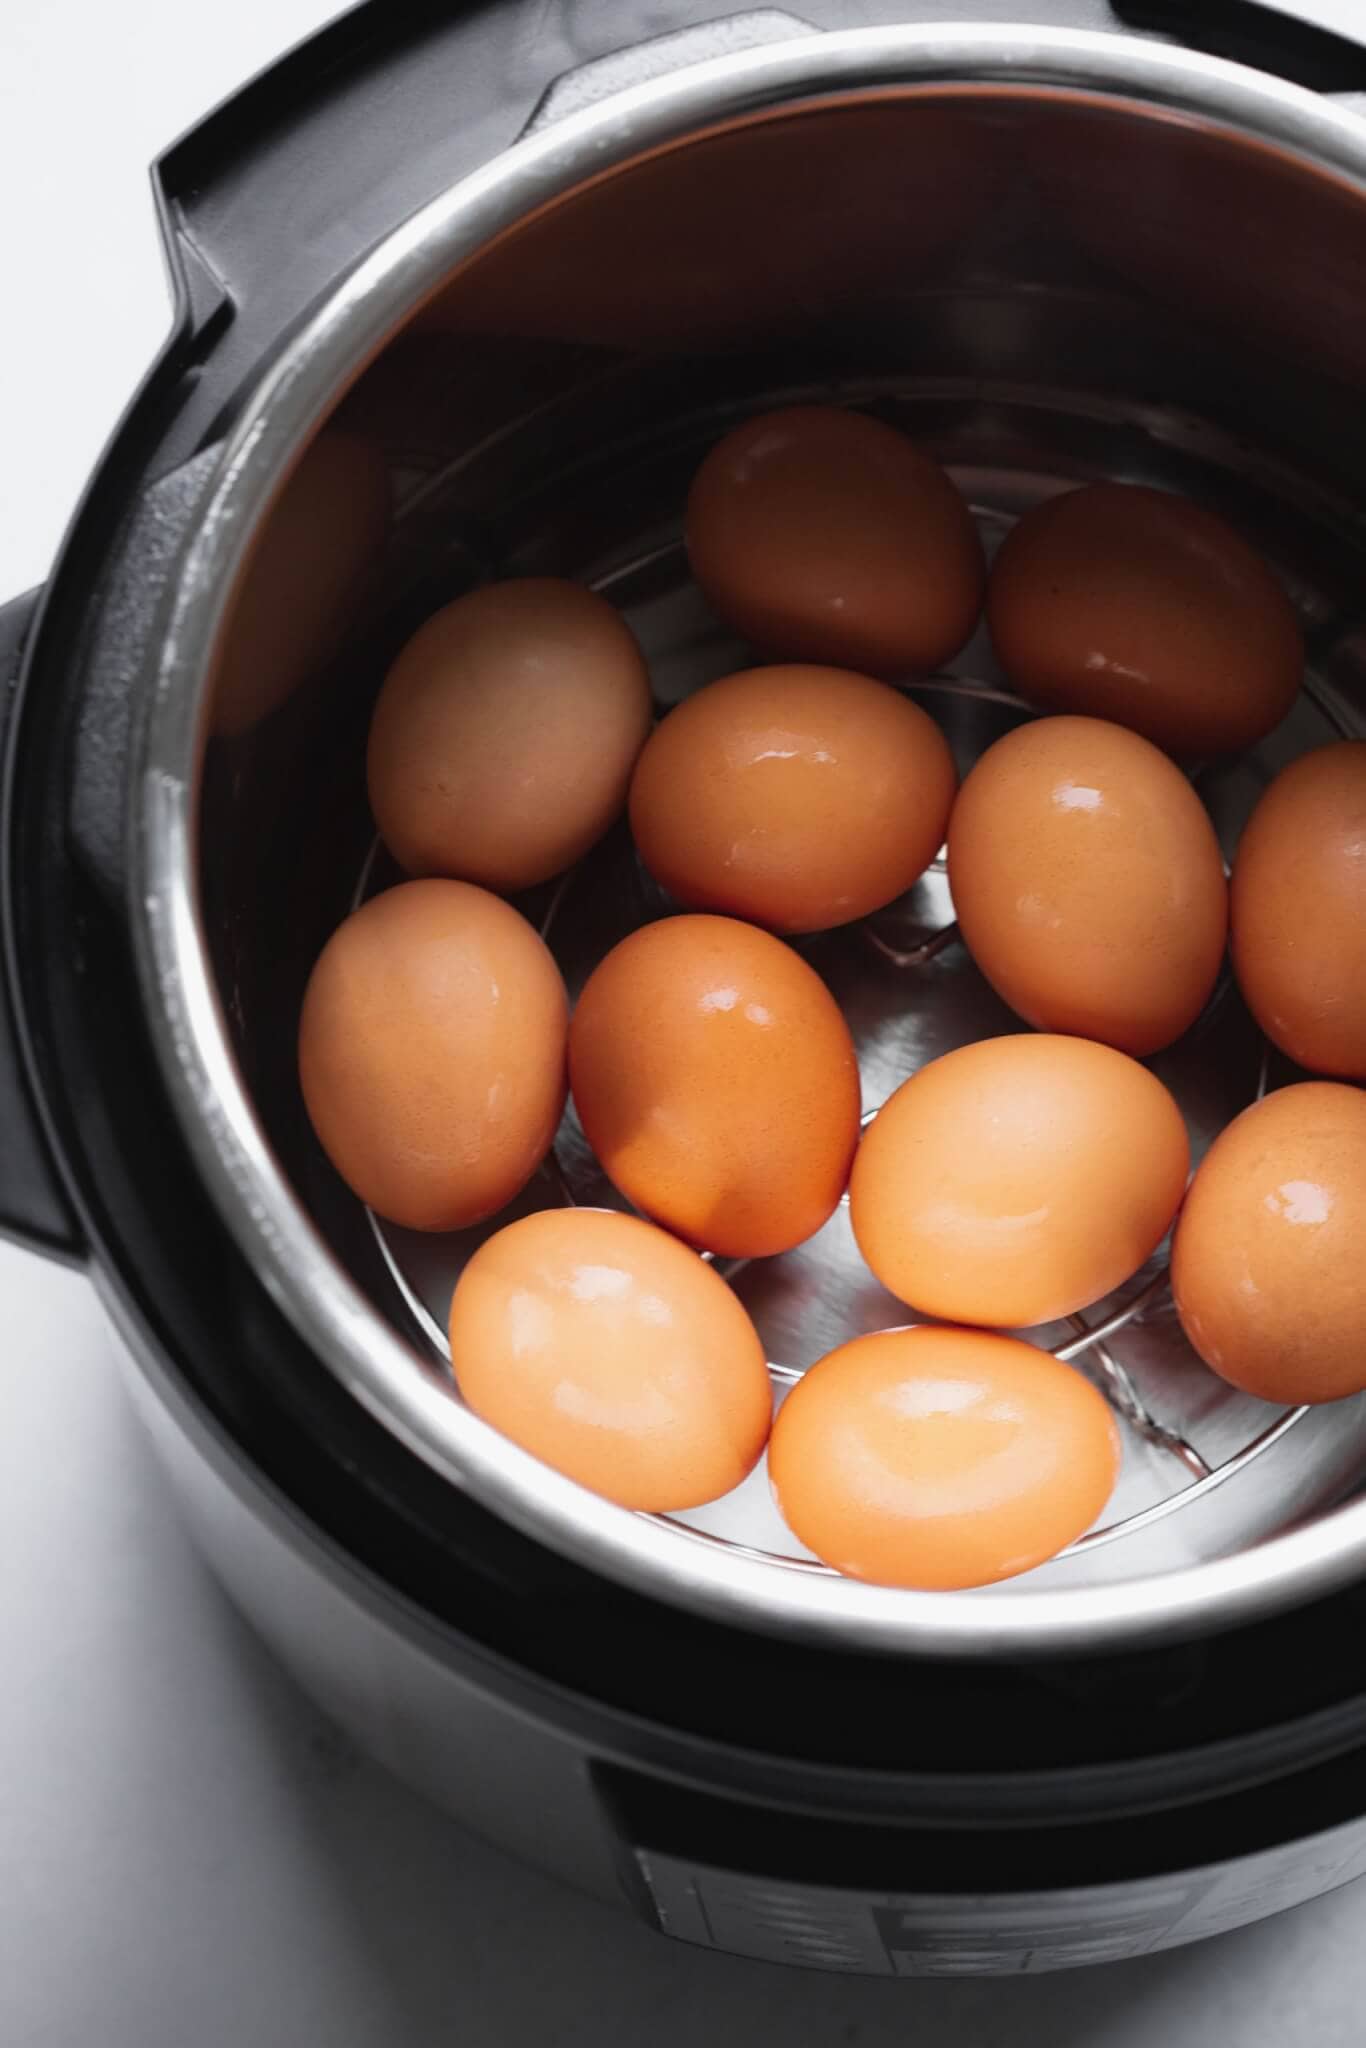 Eggs in the instant pot on a metal trivet.